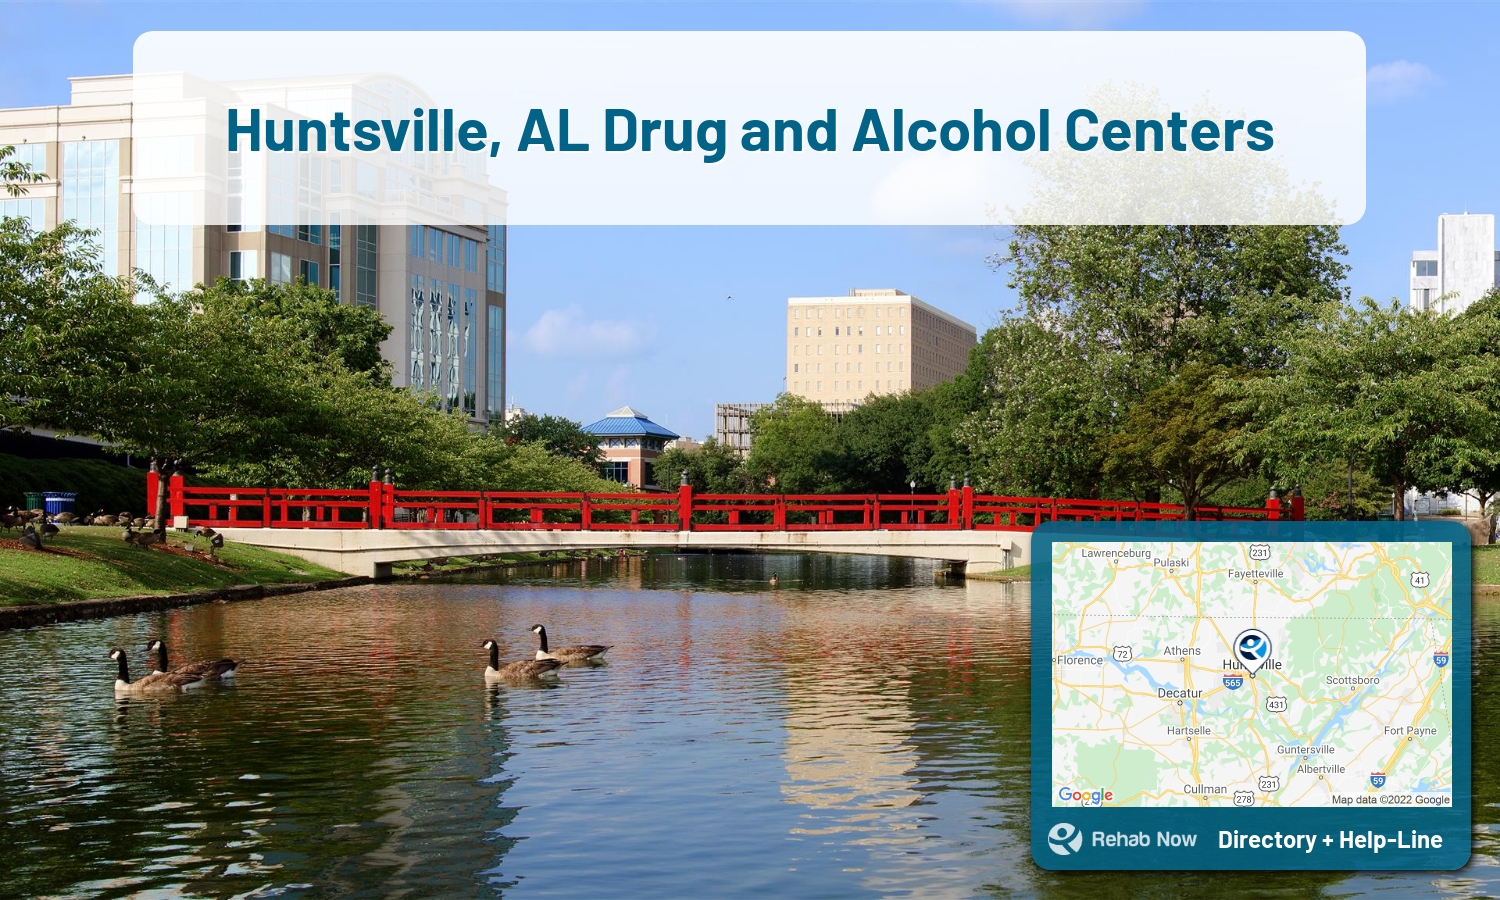 Huntsville, AL Treatment Centers. Find drug rehab in Huntsville, Alabama, or detox and treatment programs. Get the right help now!